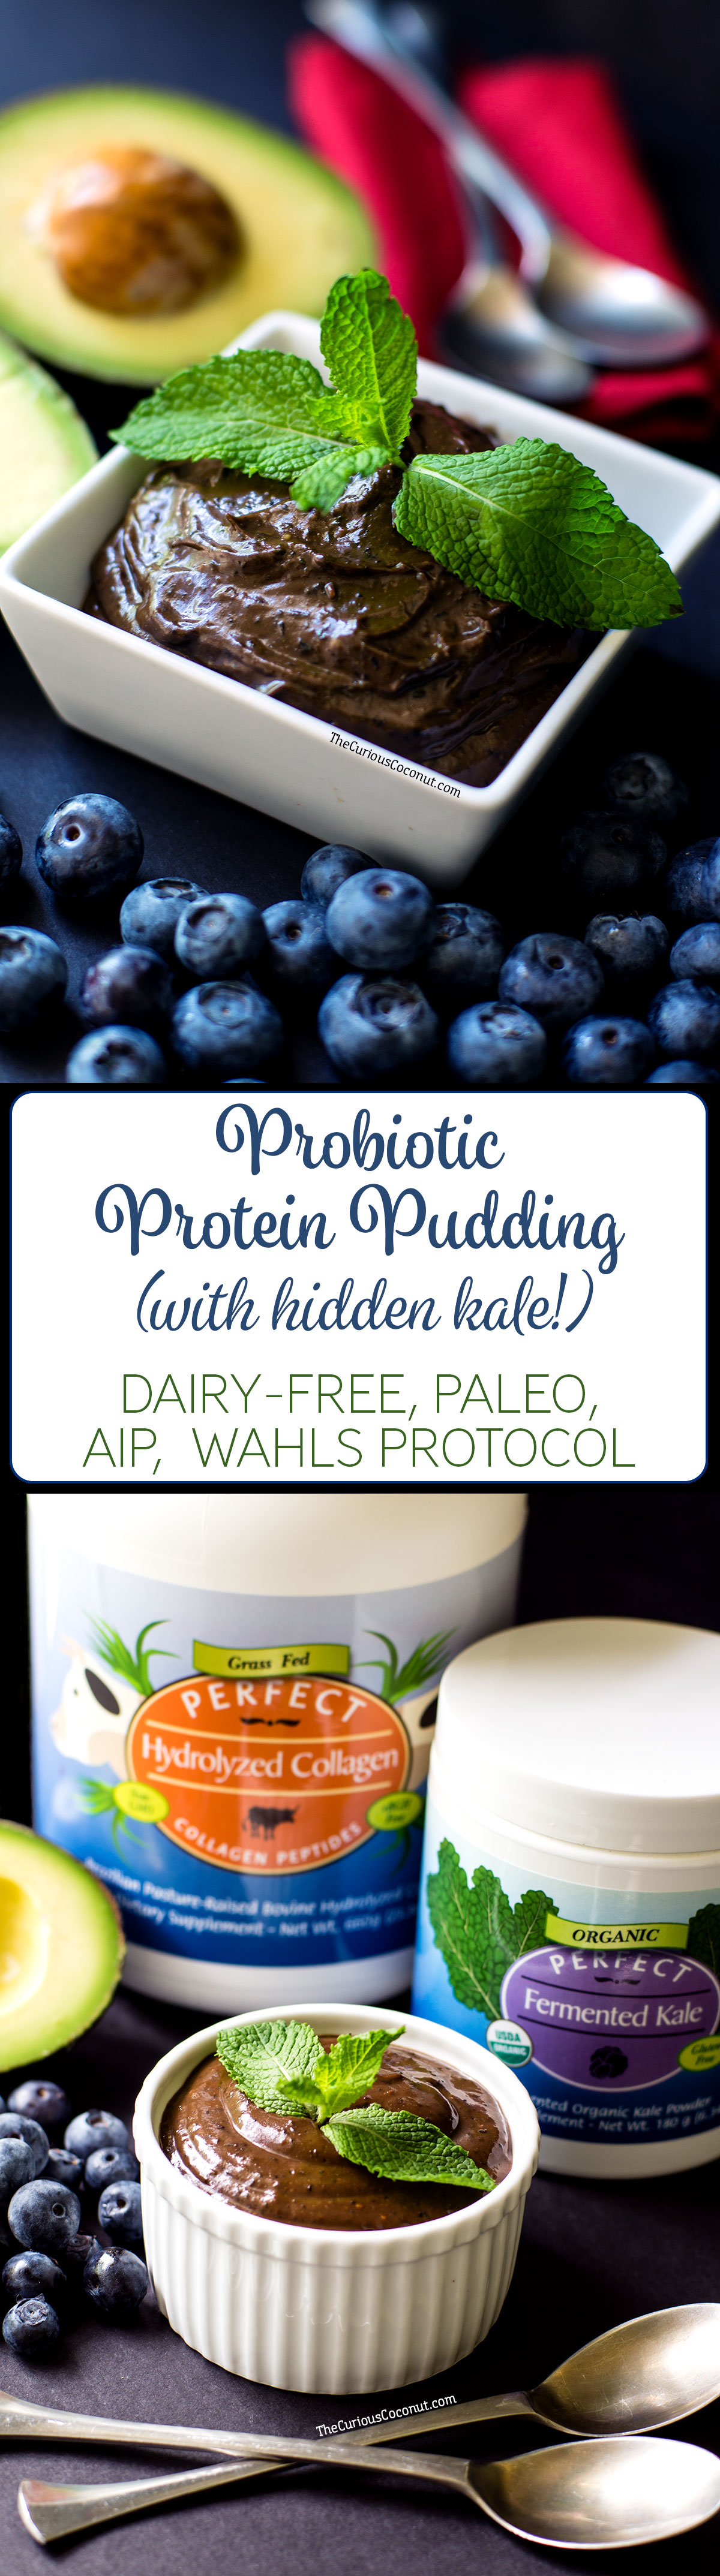 Probiotic Mint Chocolate Blueberry Avocado Pudding with hidden kale // (Paleo, AIP option, Gluten-free, Egg-free, Dairy-Free)// TheCuriousCoconut.com